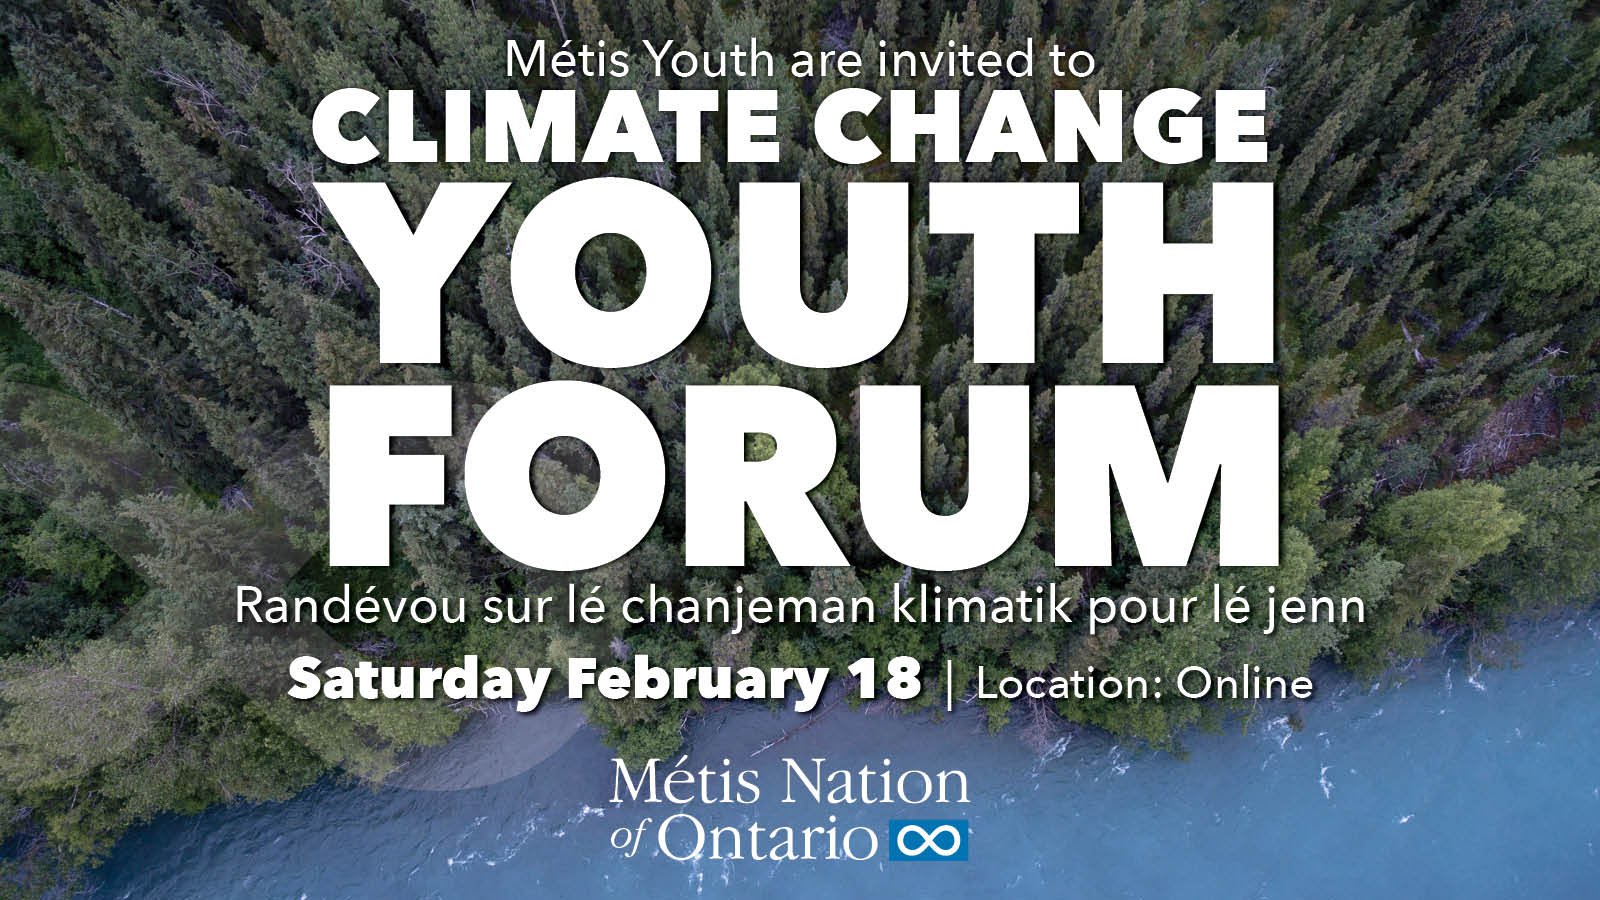 An image about the MNO Climate Change Youth Forurm